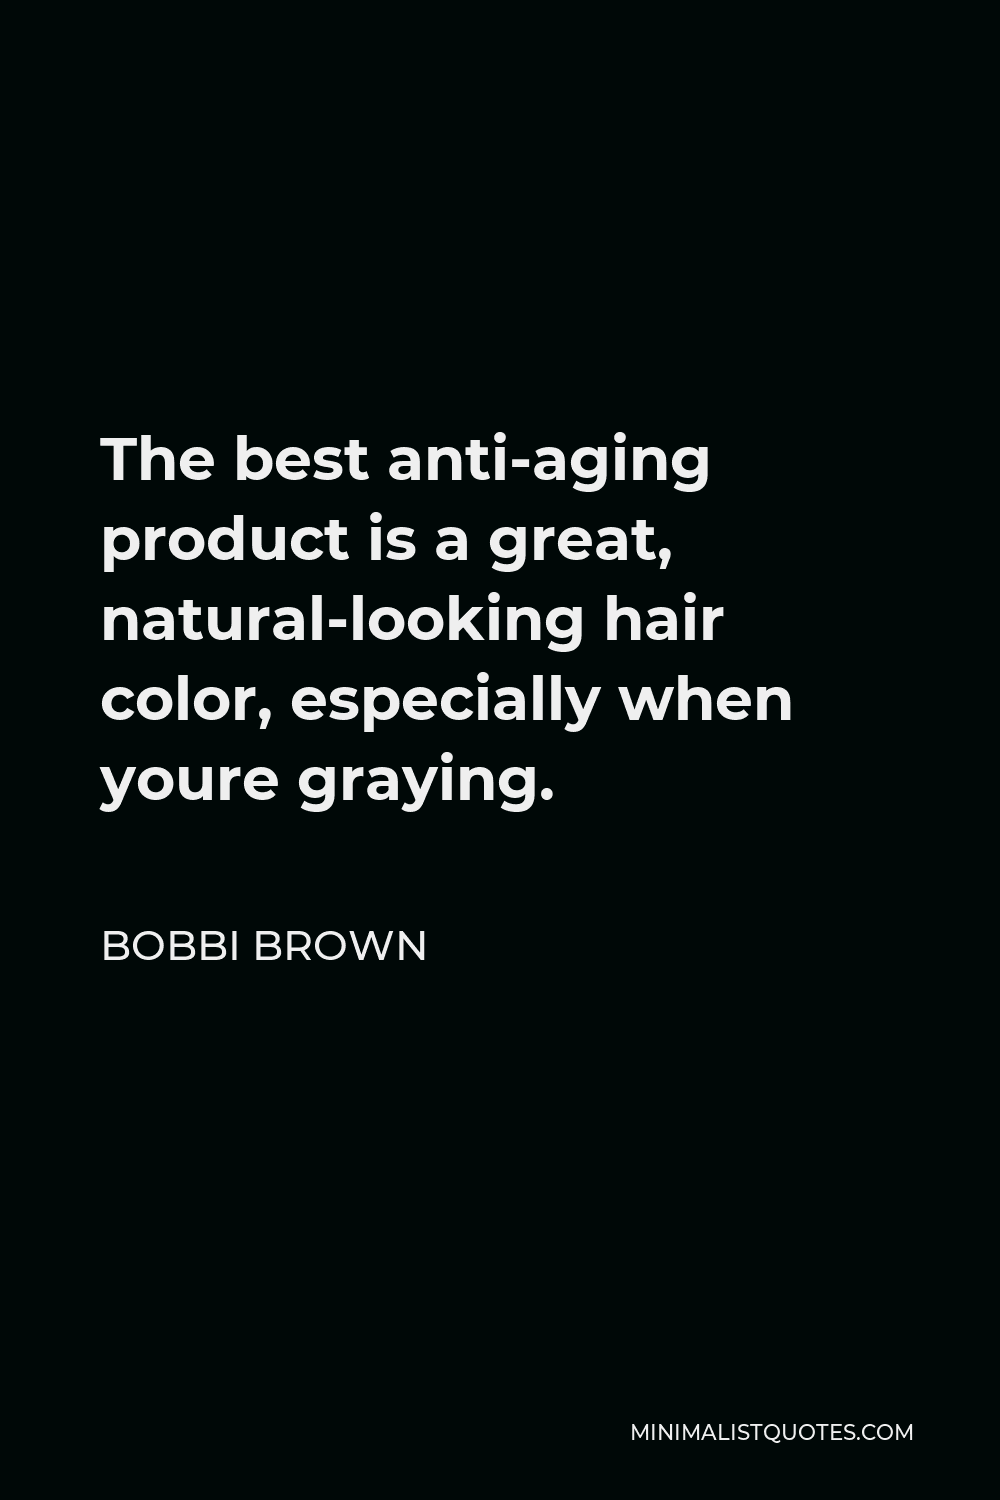 Bobbi Brown Quote - The best anti-aging product is a great, natural-looking hair color, especially when youre graying.